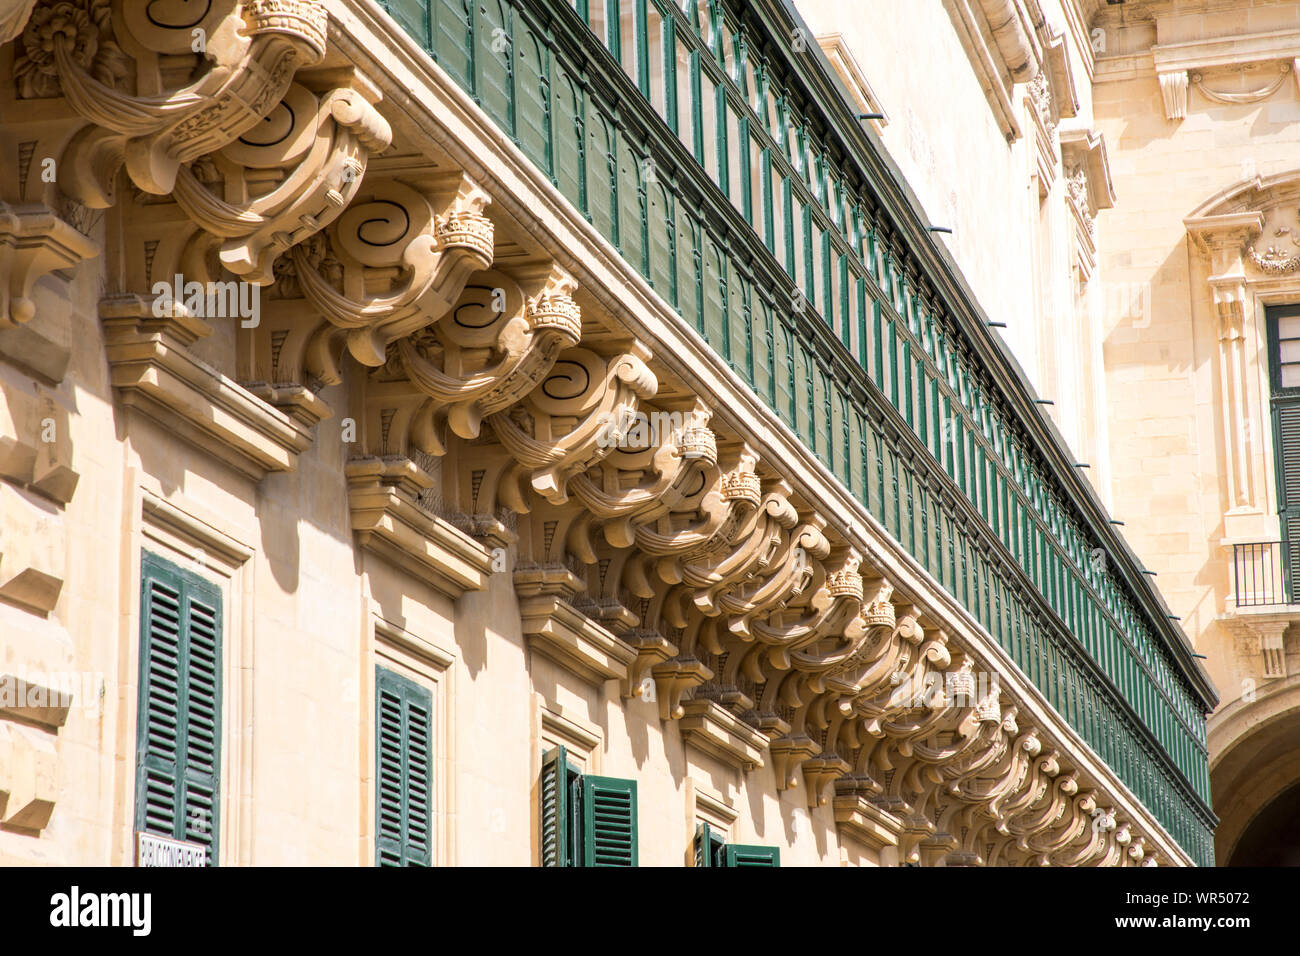 Valetta, Malta, typical balconies, on the building of the Grandmaster Palace, on Palace Square, Stock Photo